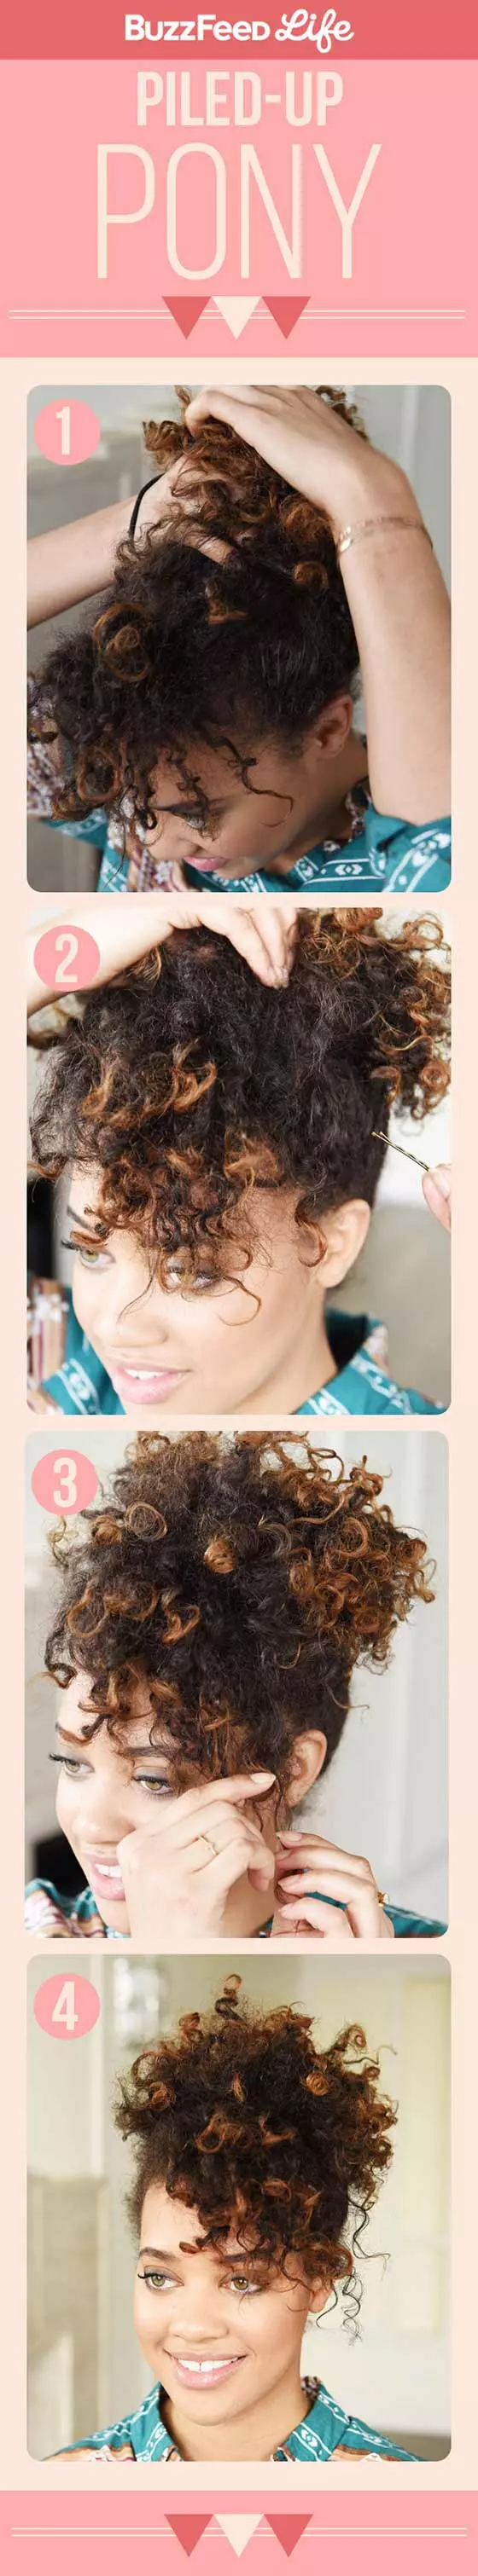 Piled-up pony short hairstyle for black women